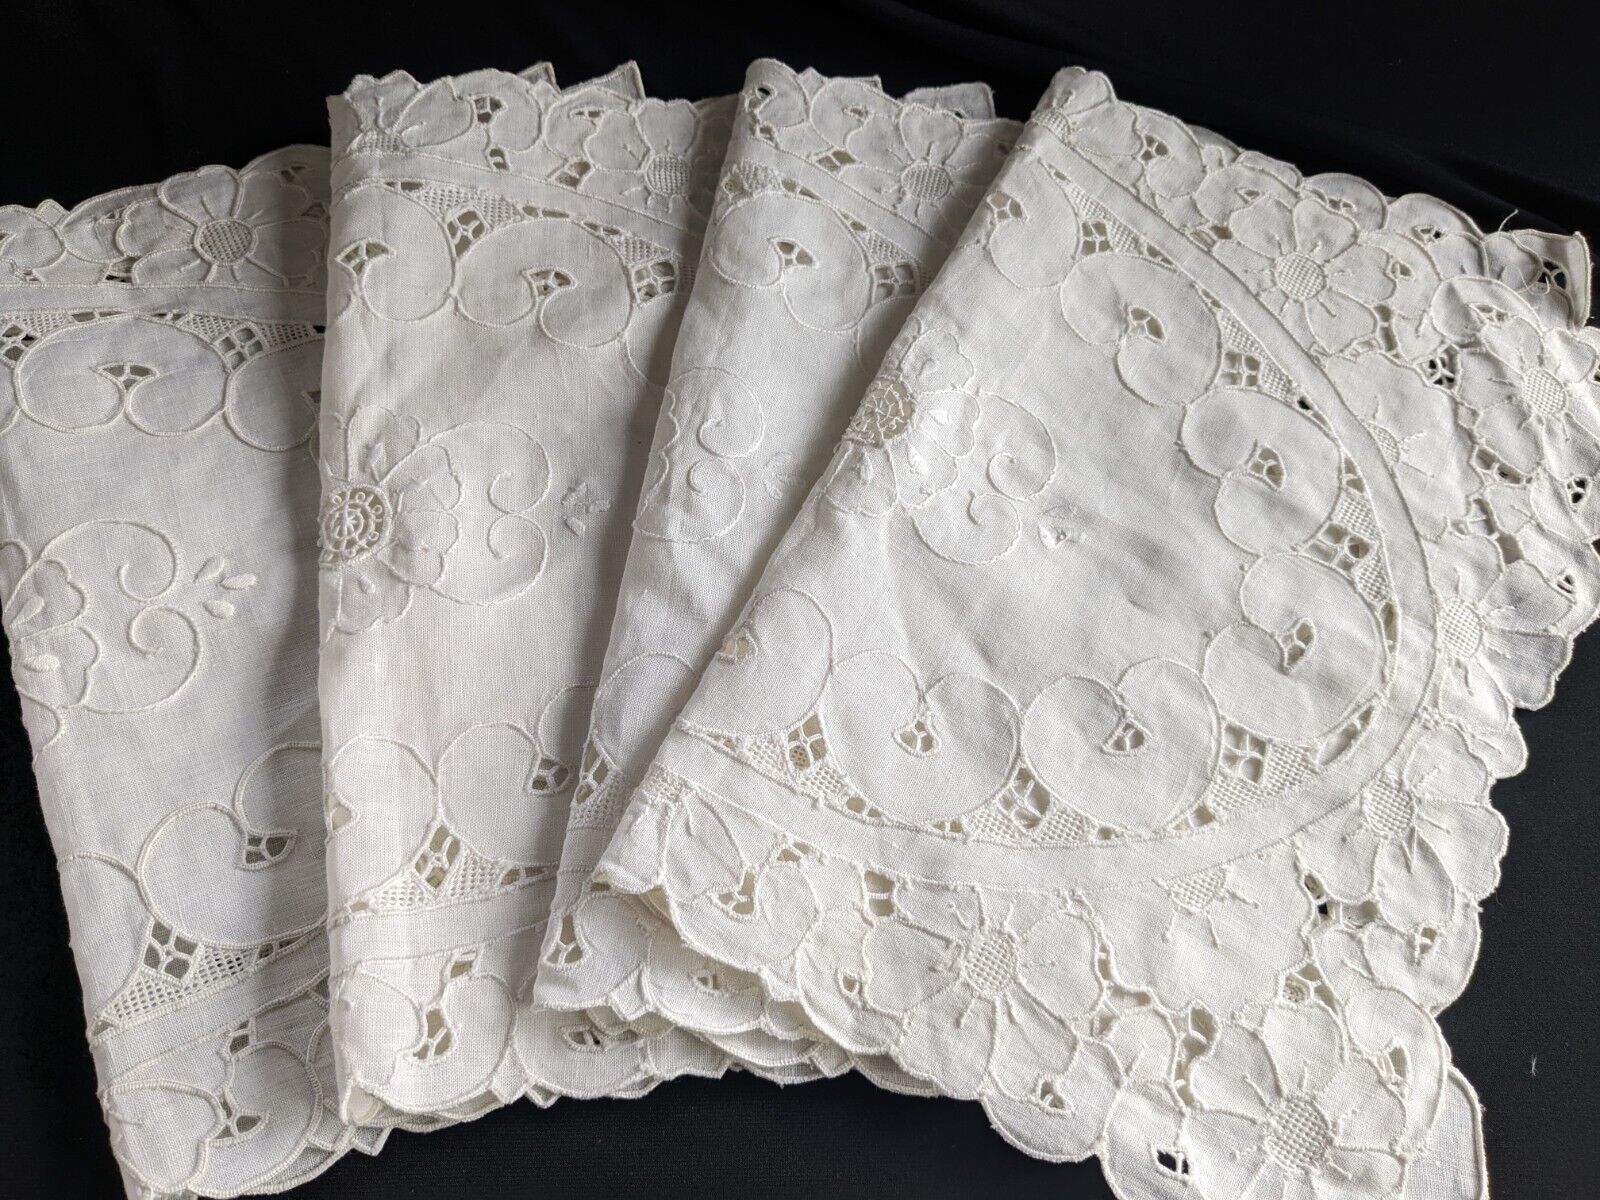 Vtg Eyelet Embroidered Lace  Placemats (4) French Country Shabby Chic Cottagecor